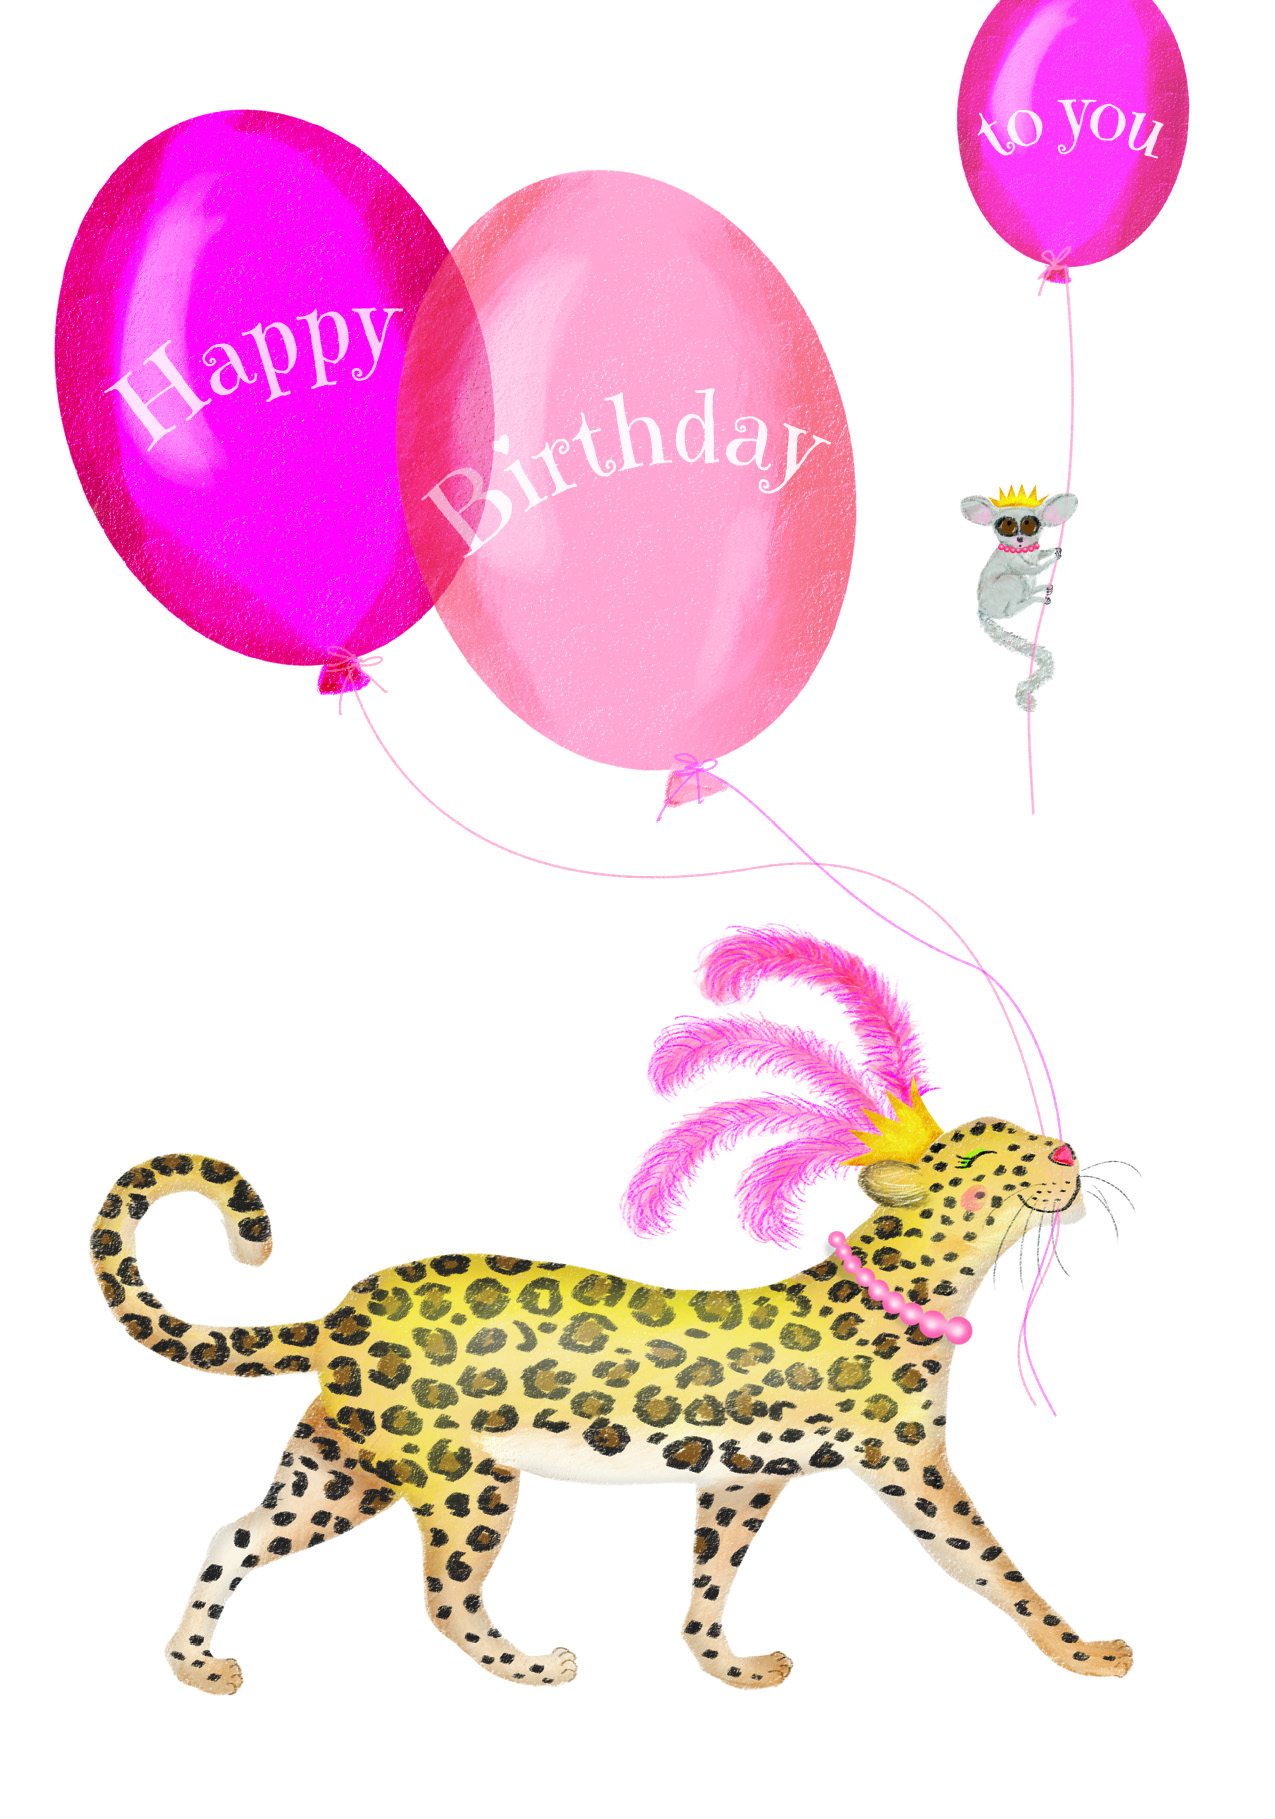 Glamorous leopard wearing a crown and feathers, carrying balloons with Happy birthday to you written on them